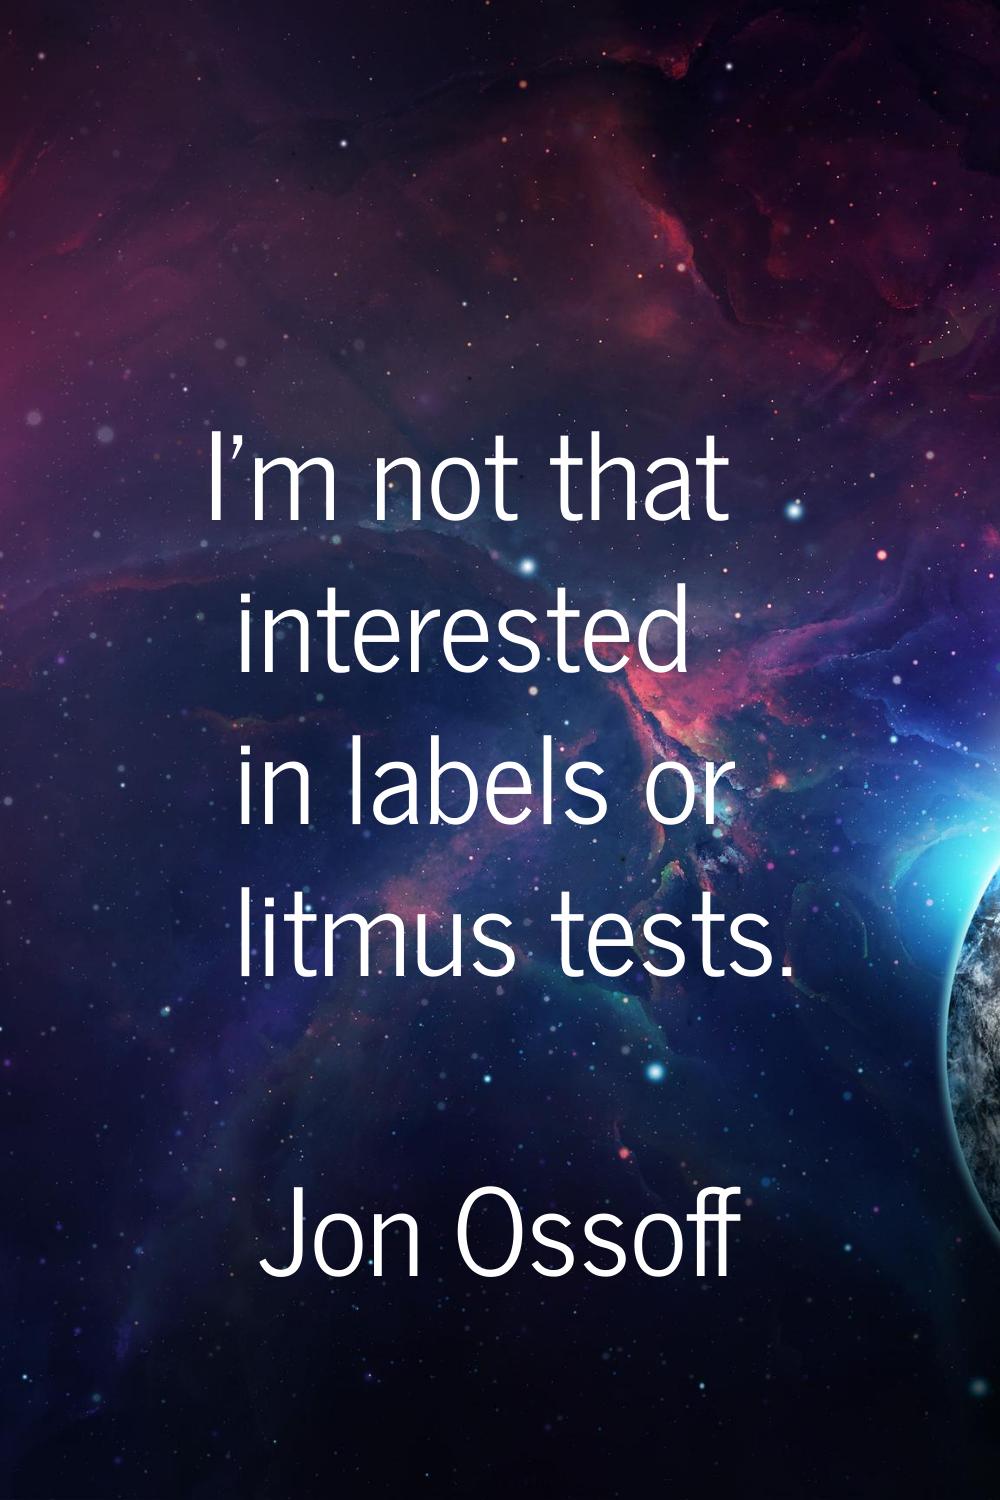 I'm not that interested in labels or litmus tests.